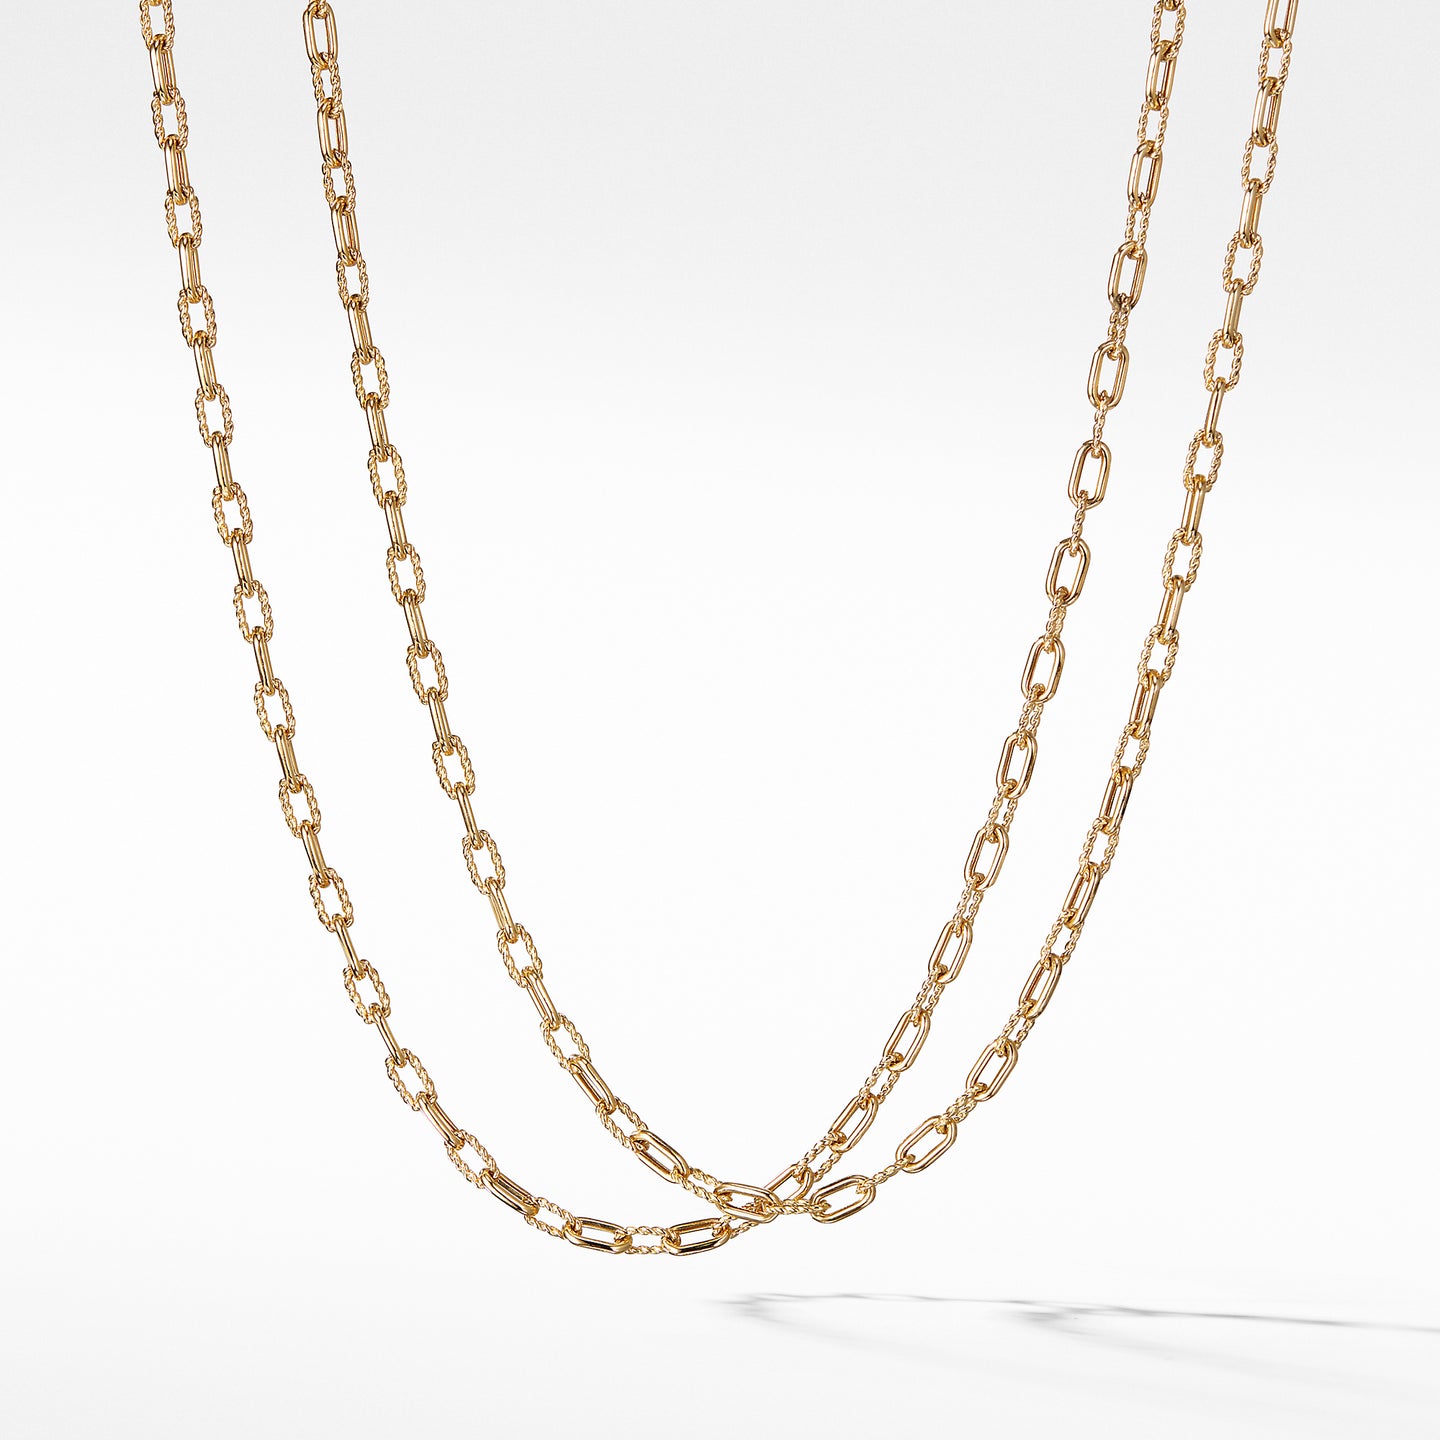 DY Madison® Thin Necklace in 18K Gold, 3mm, 36